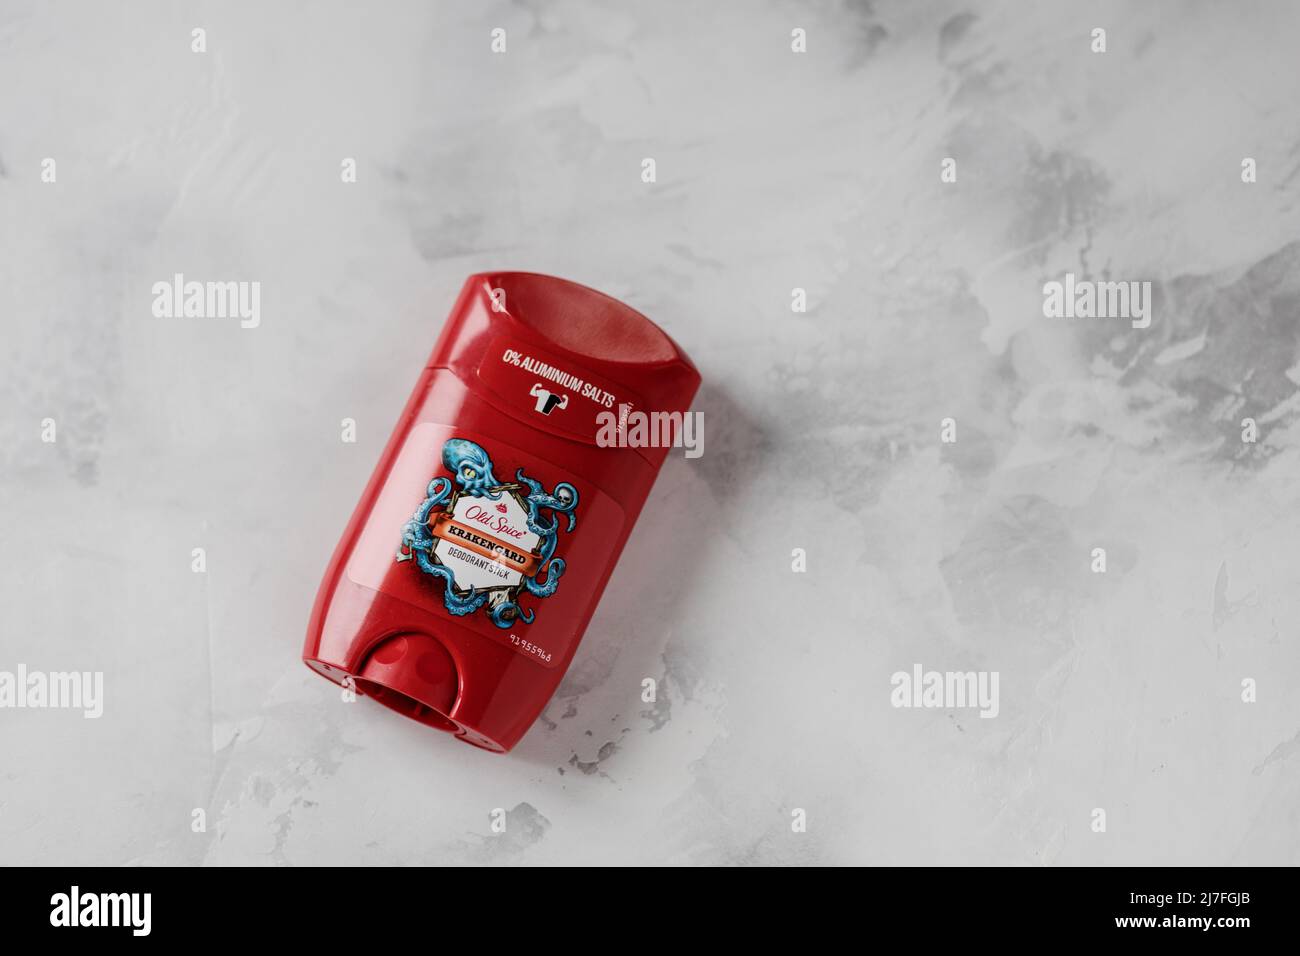 Minsk, Belarus, May 2022 -  Stick of deodorant Old Spice krakengard on background. Old Spice is an American brand of male grooming products. Stock Photo